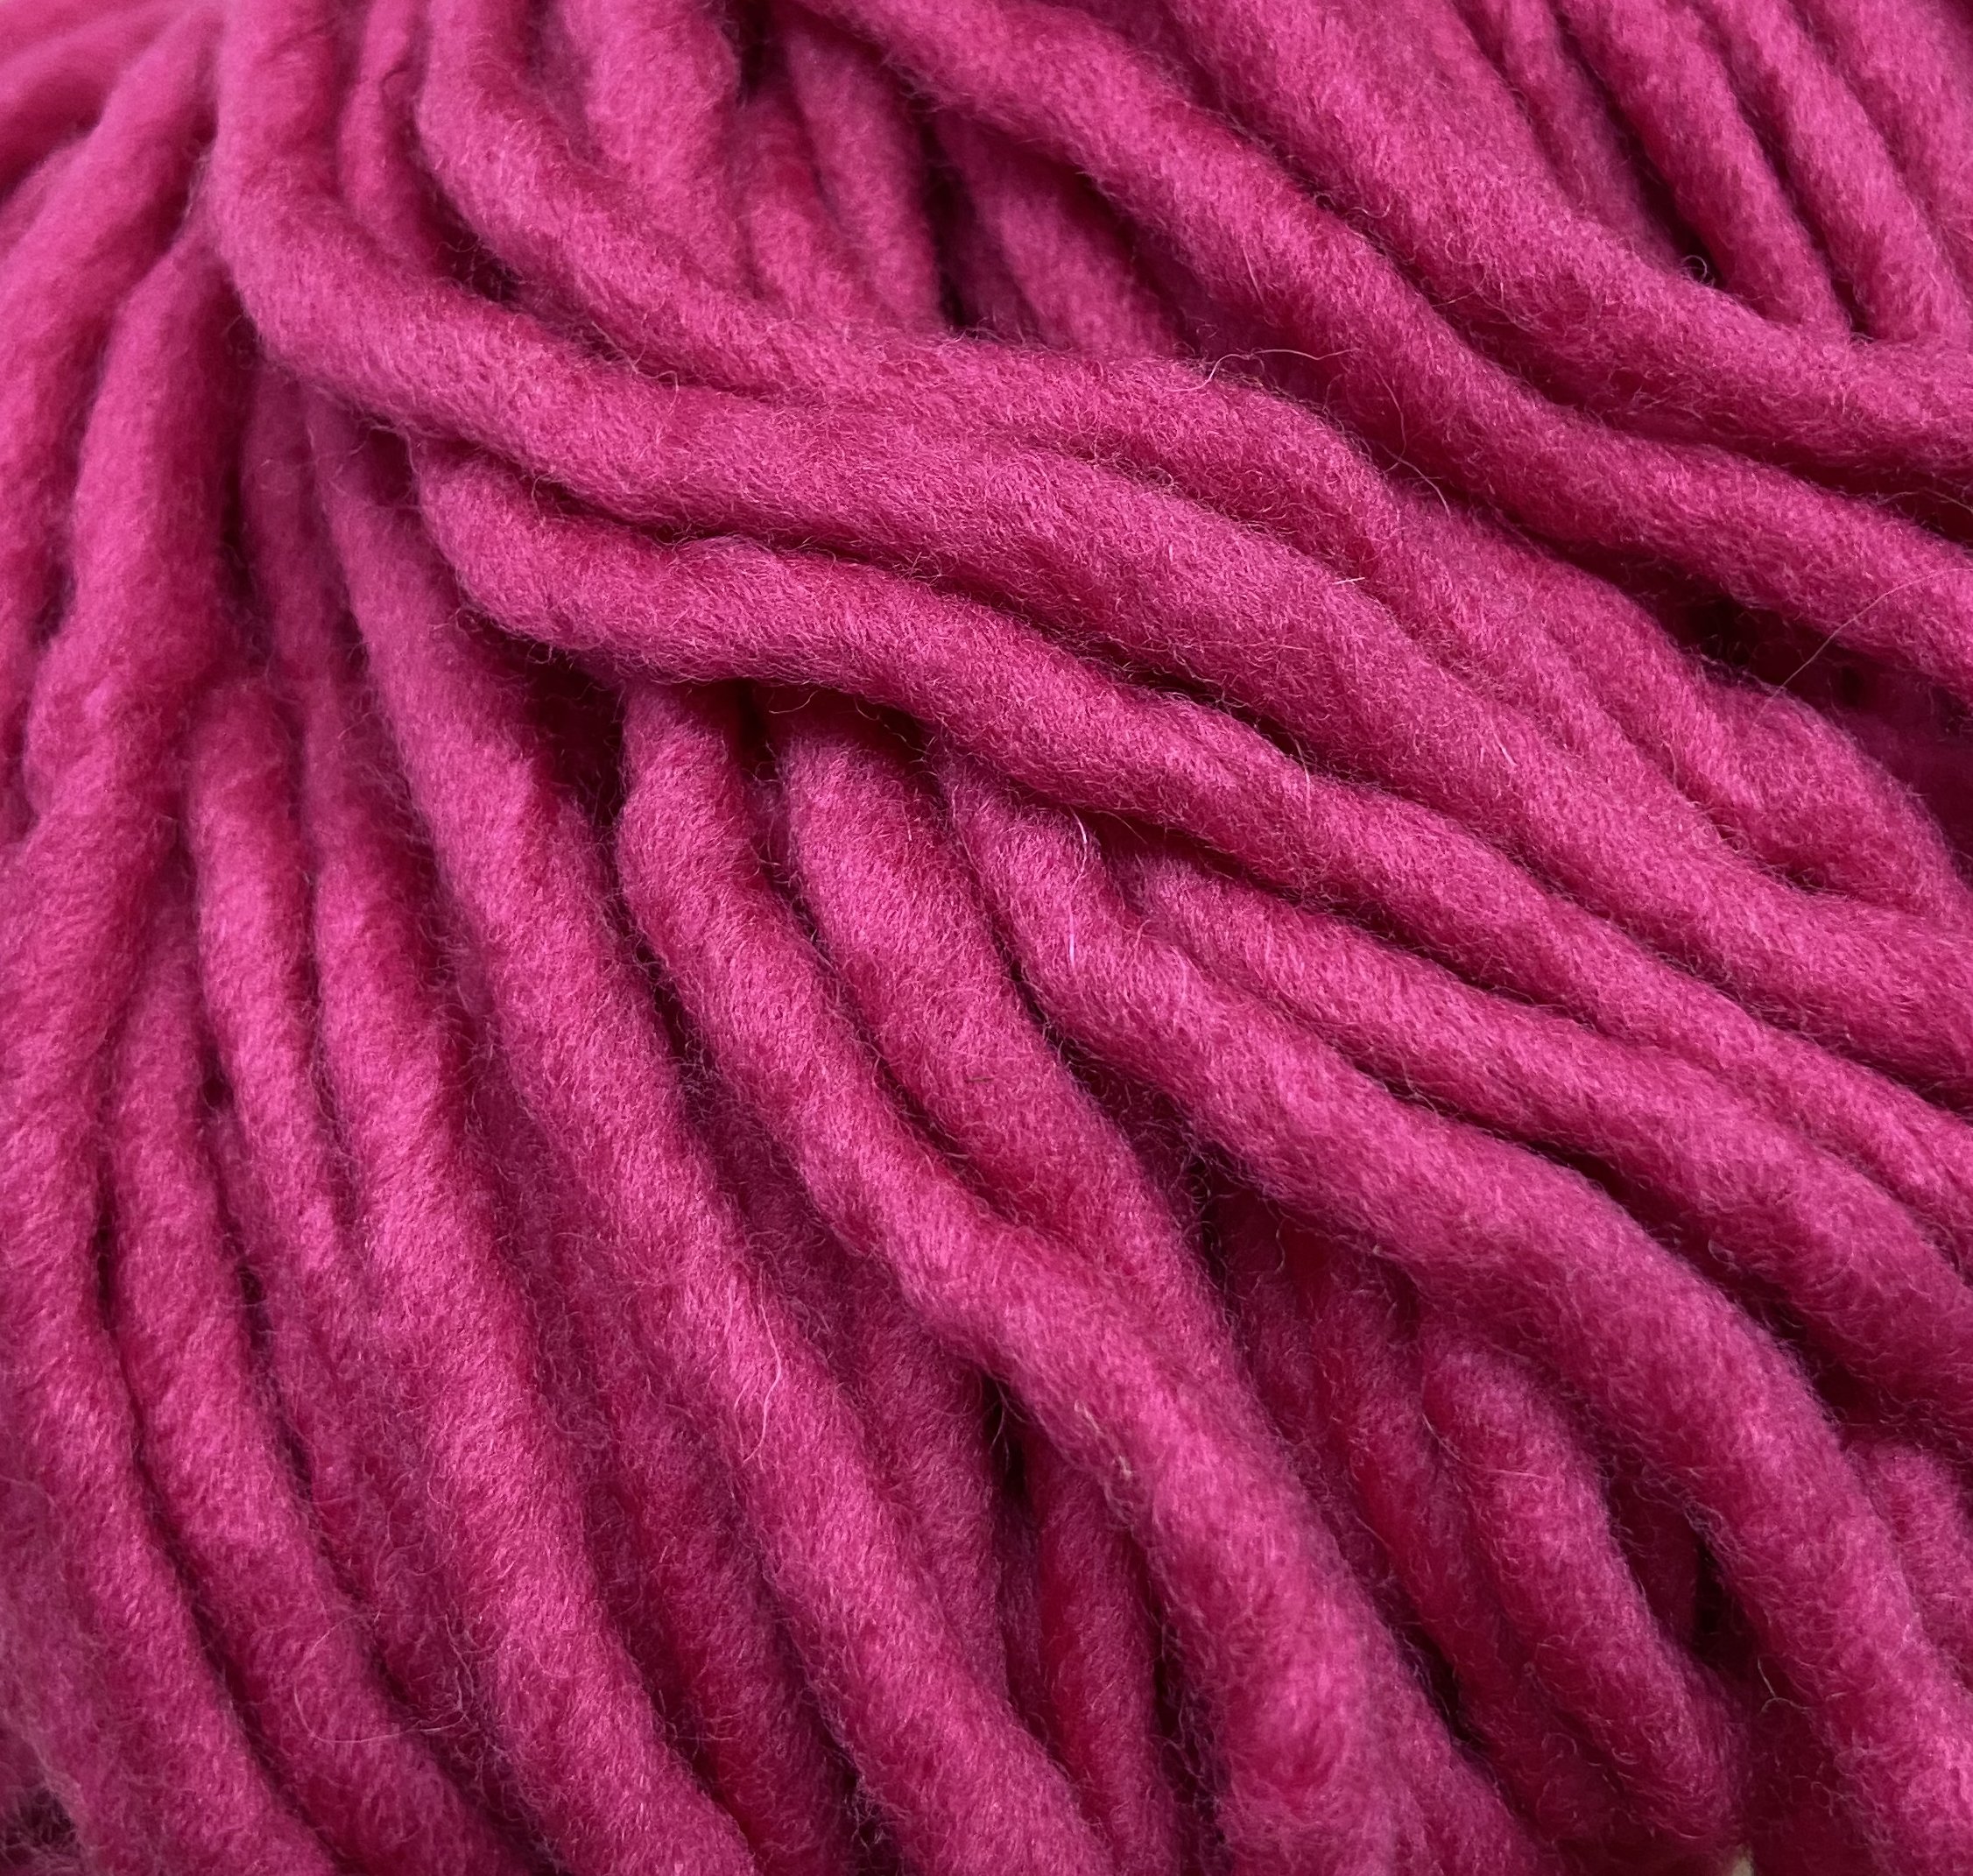 Lotus Pink - Burly Spun Yarn by Brown Sheep Co. 8oz 100% Wool Single Ply, Super  Bulky Yarn for Rug Hooking, Punch Needle or Weaving - Two Sizes to Choose  From —